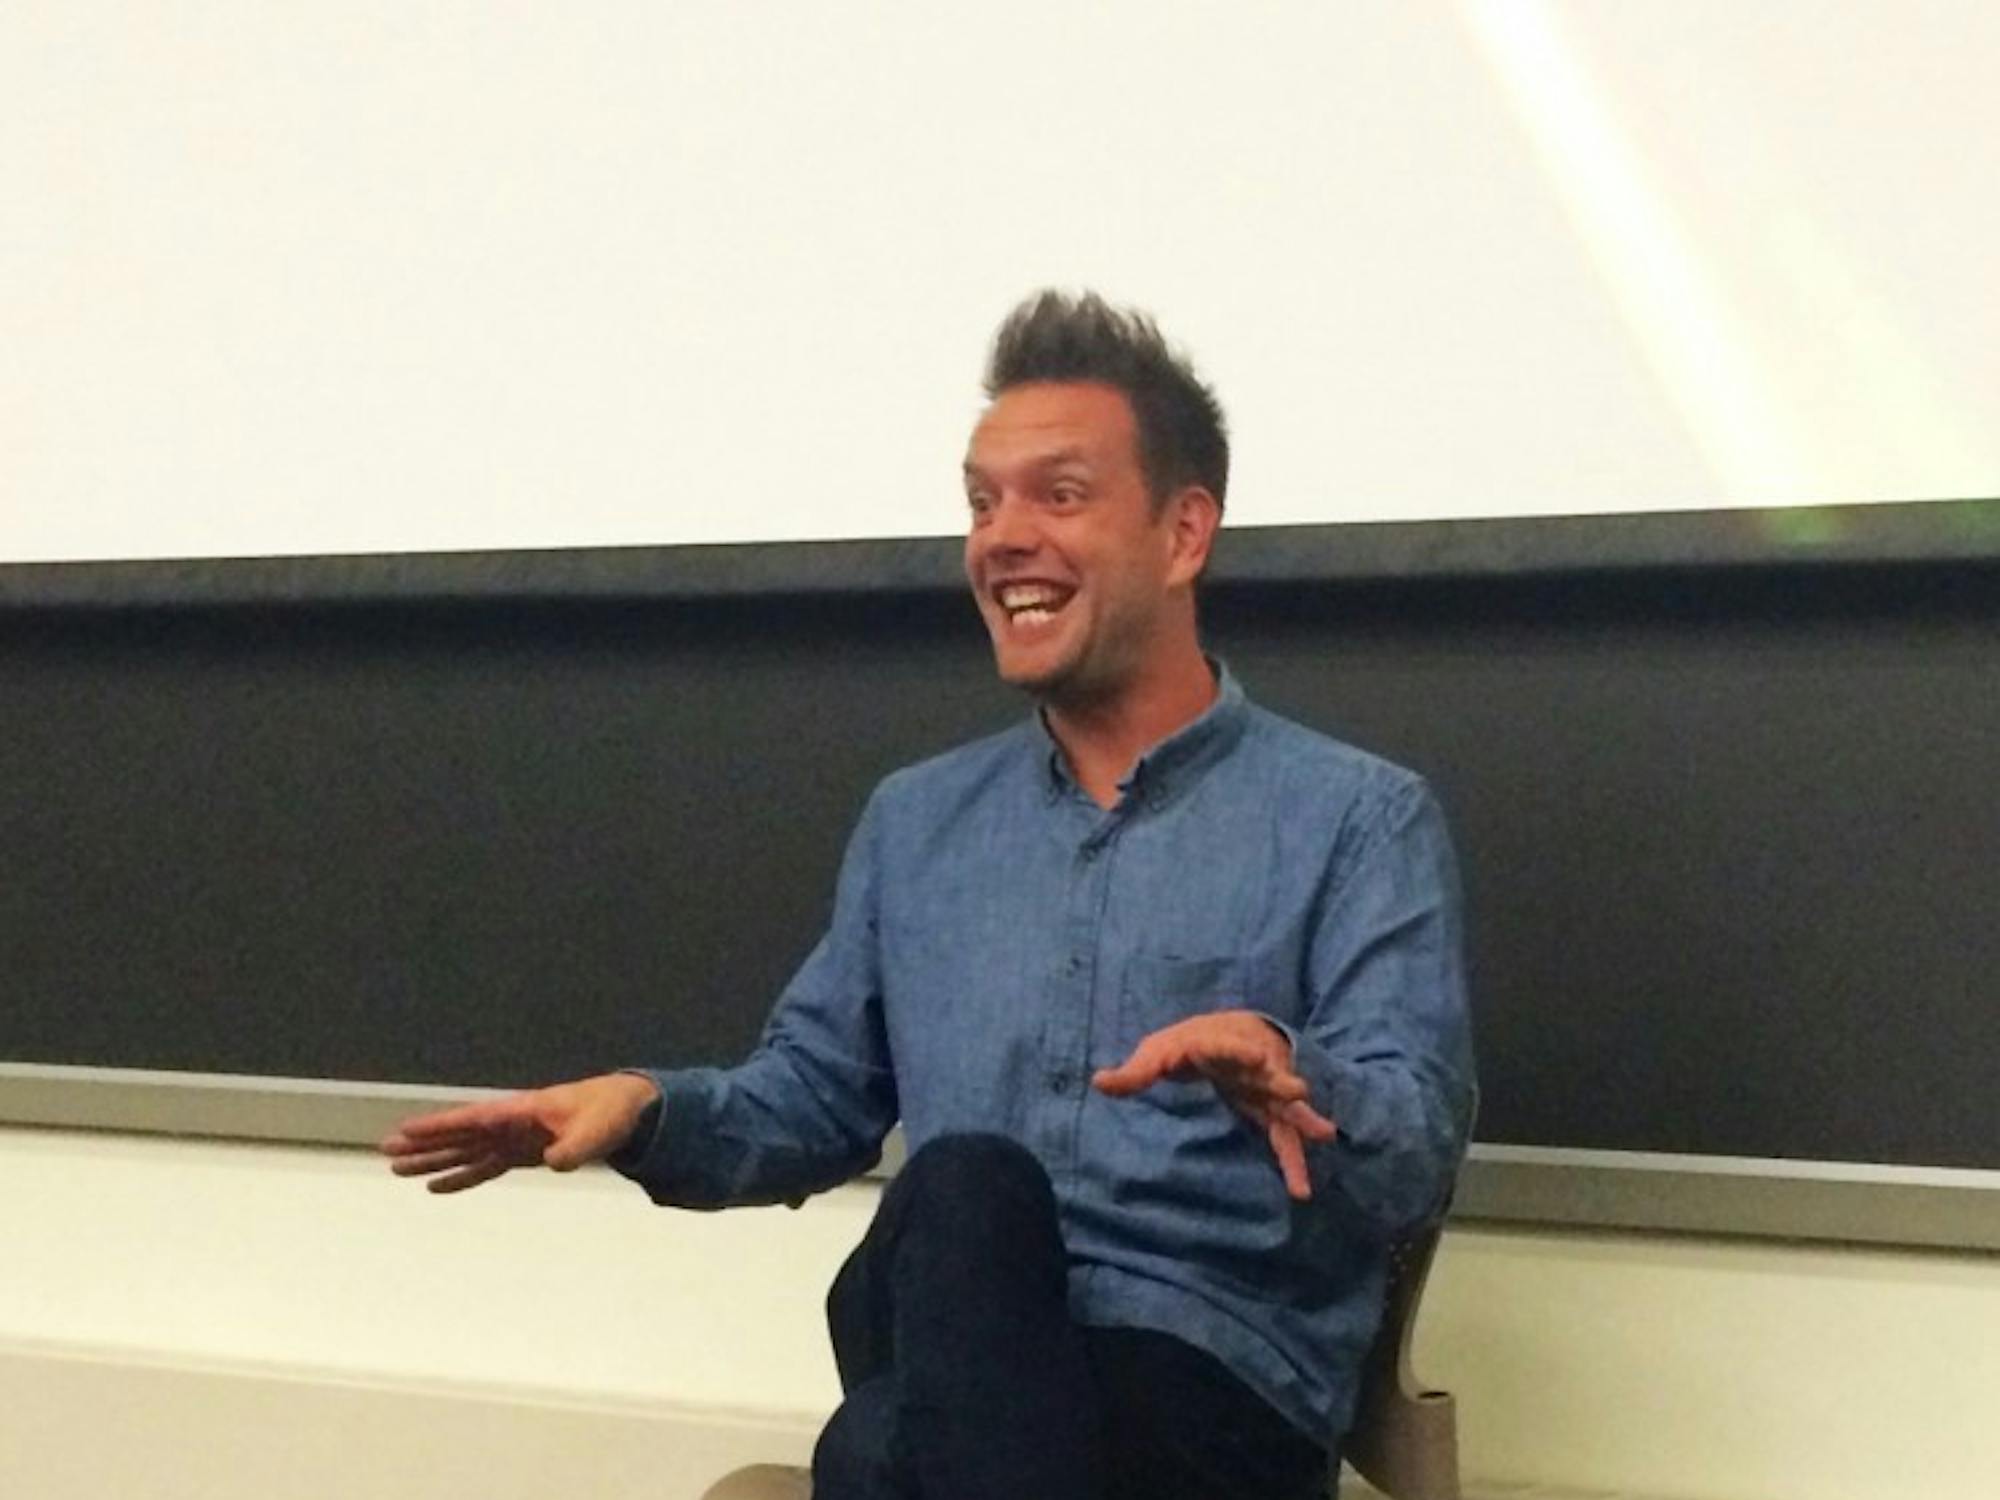 Josh Rivedal performs his one-man show "Kicking My Blue Genes in the Butt" for students.